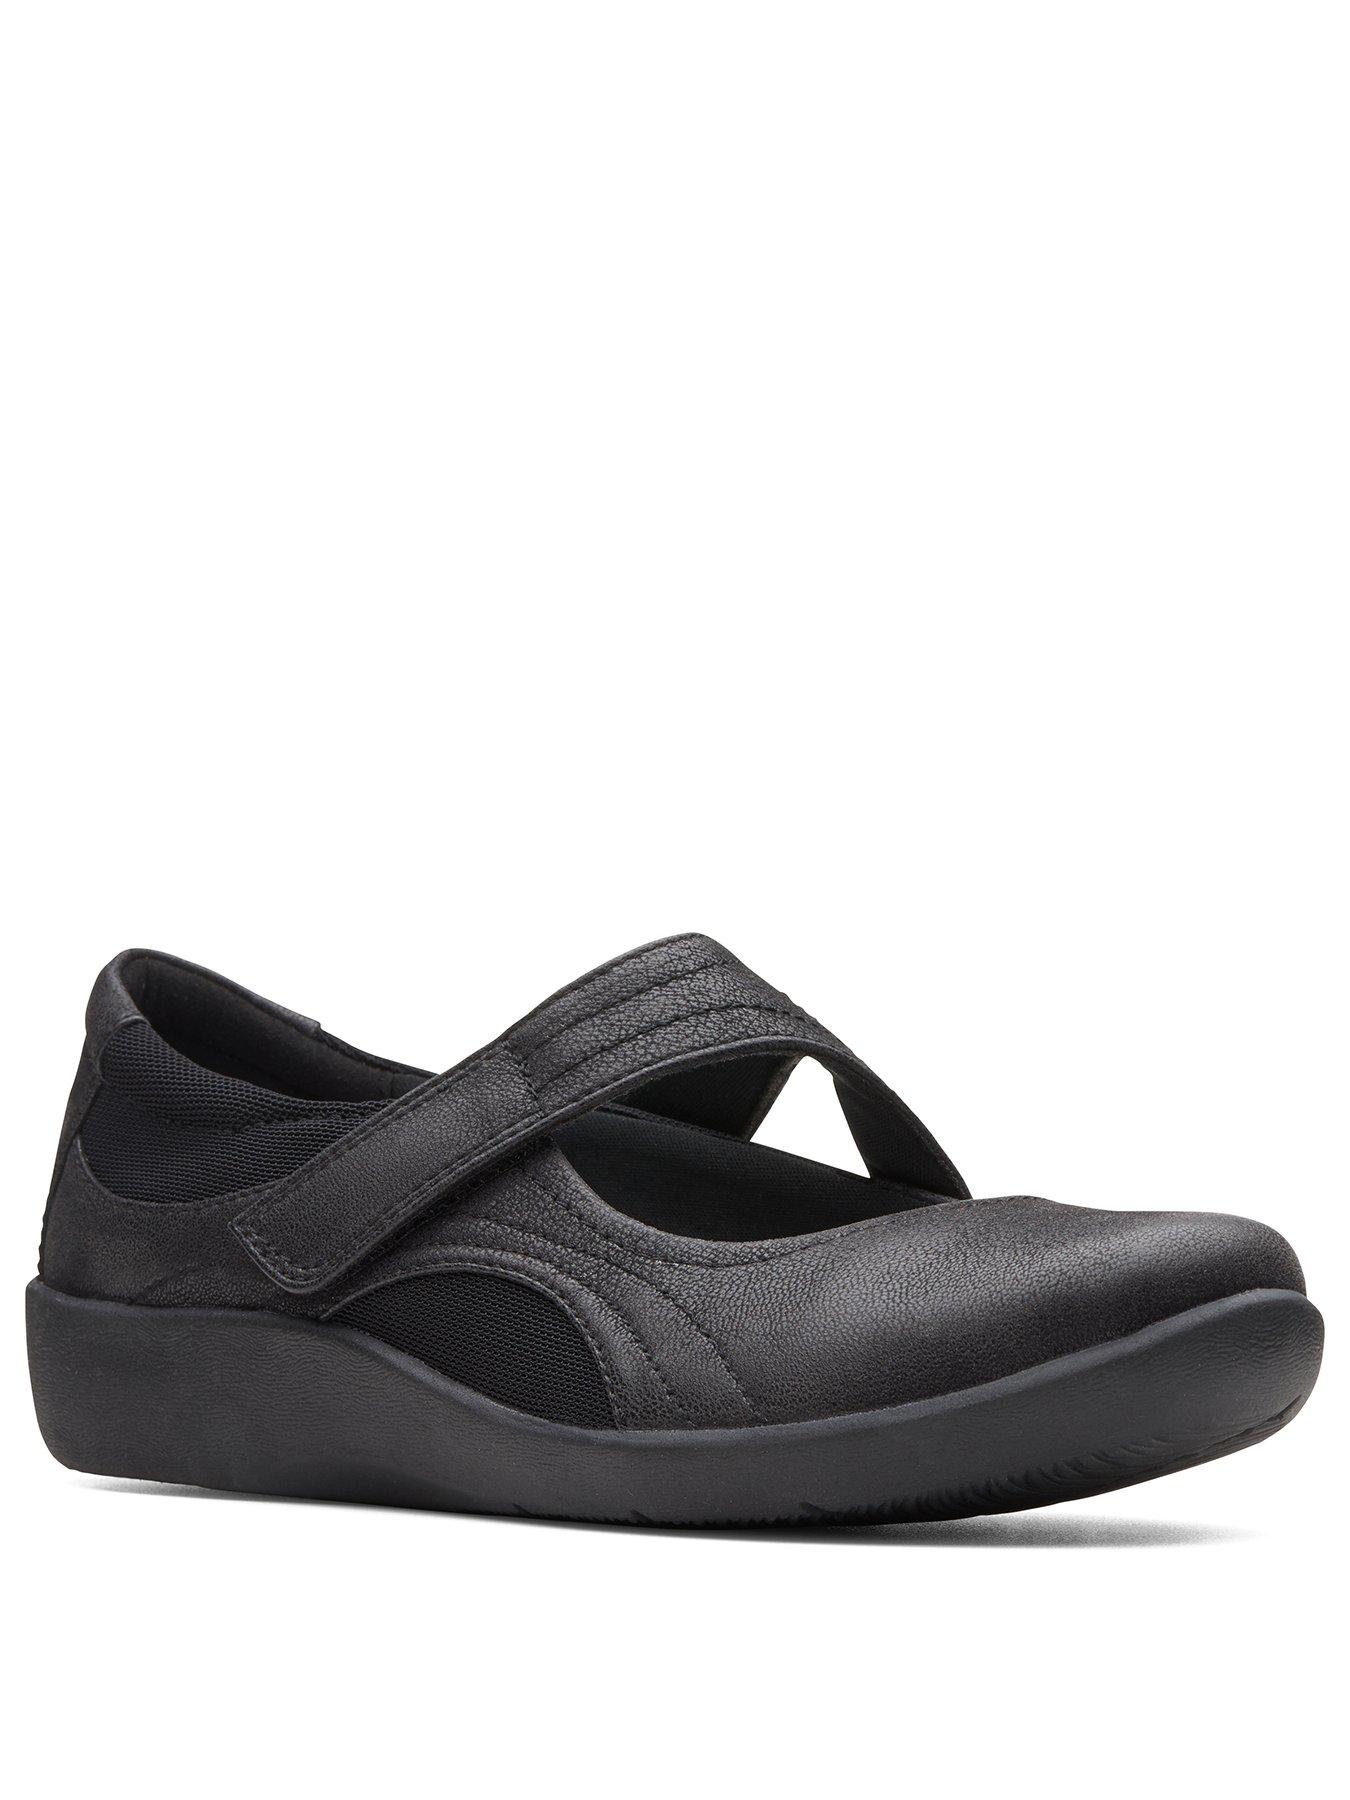 Clarks Shoes for Women | Clarks Shoes 